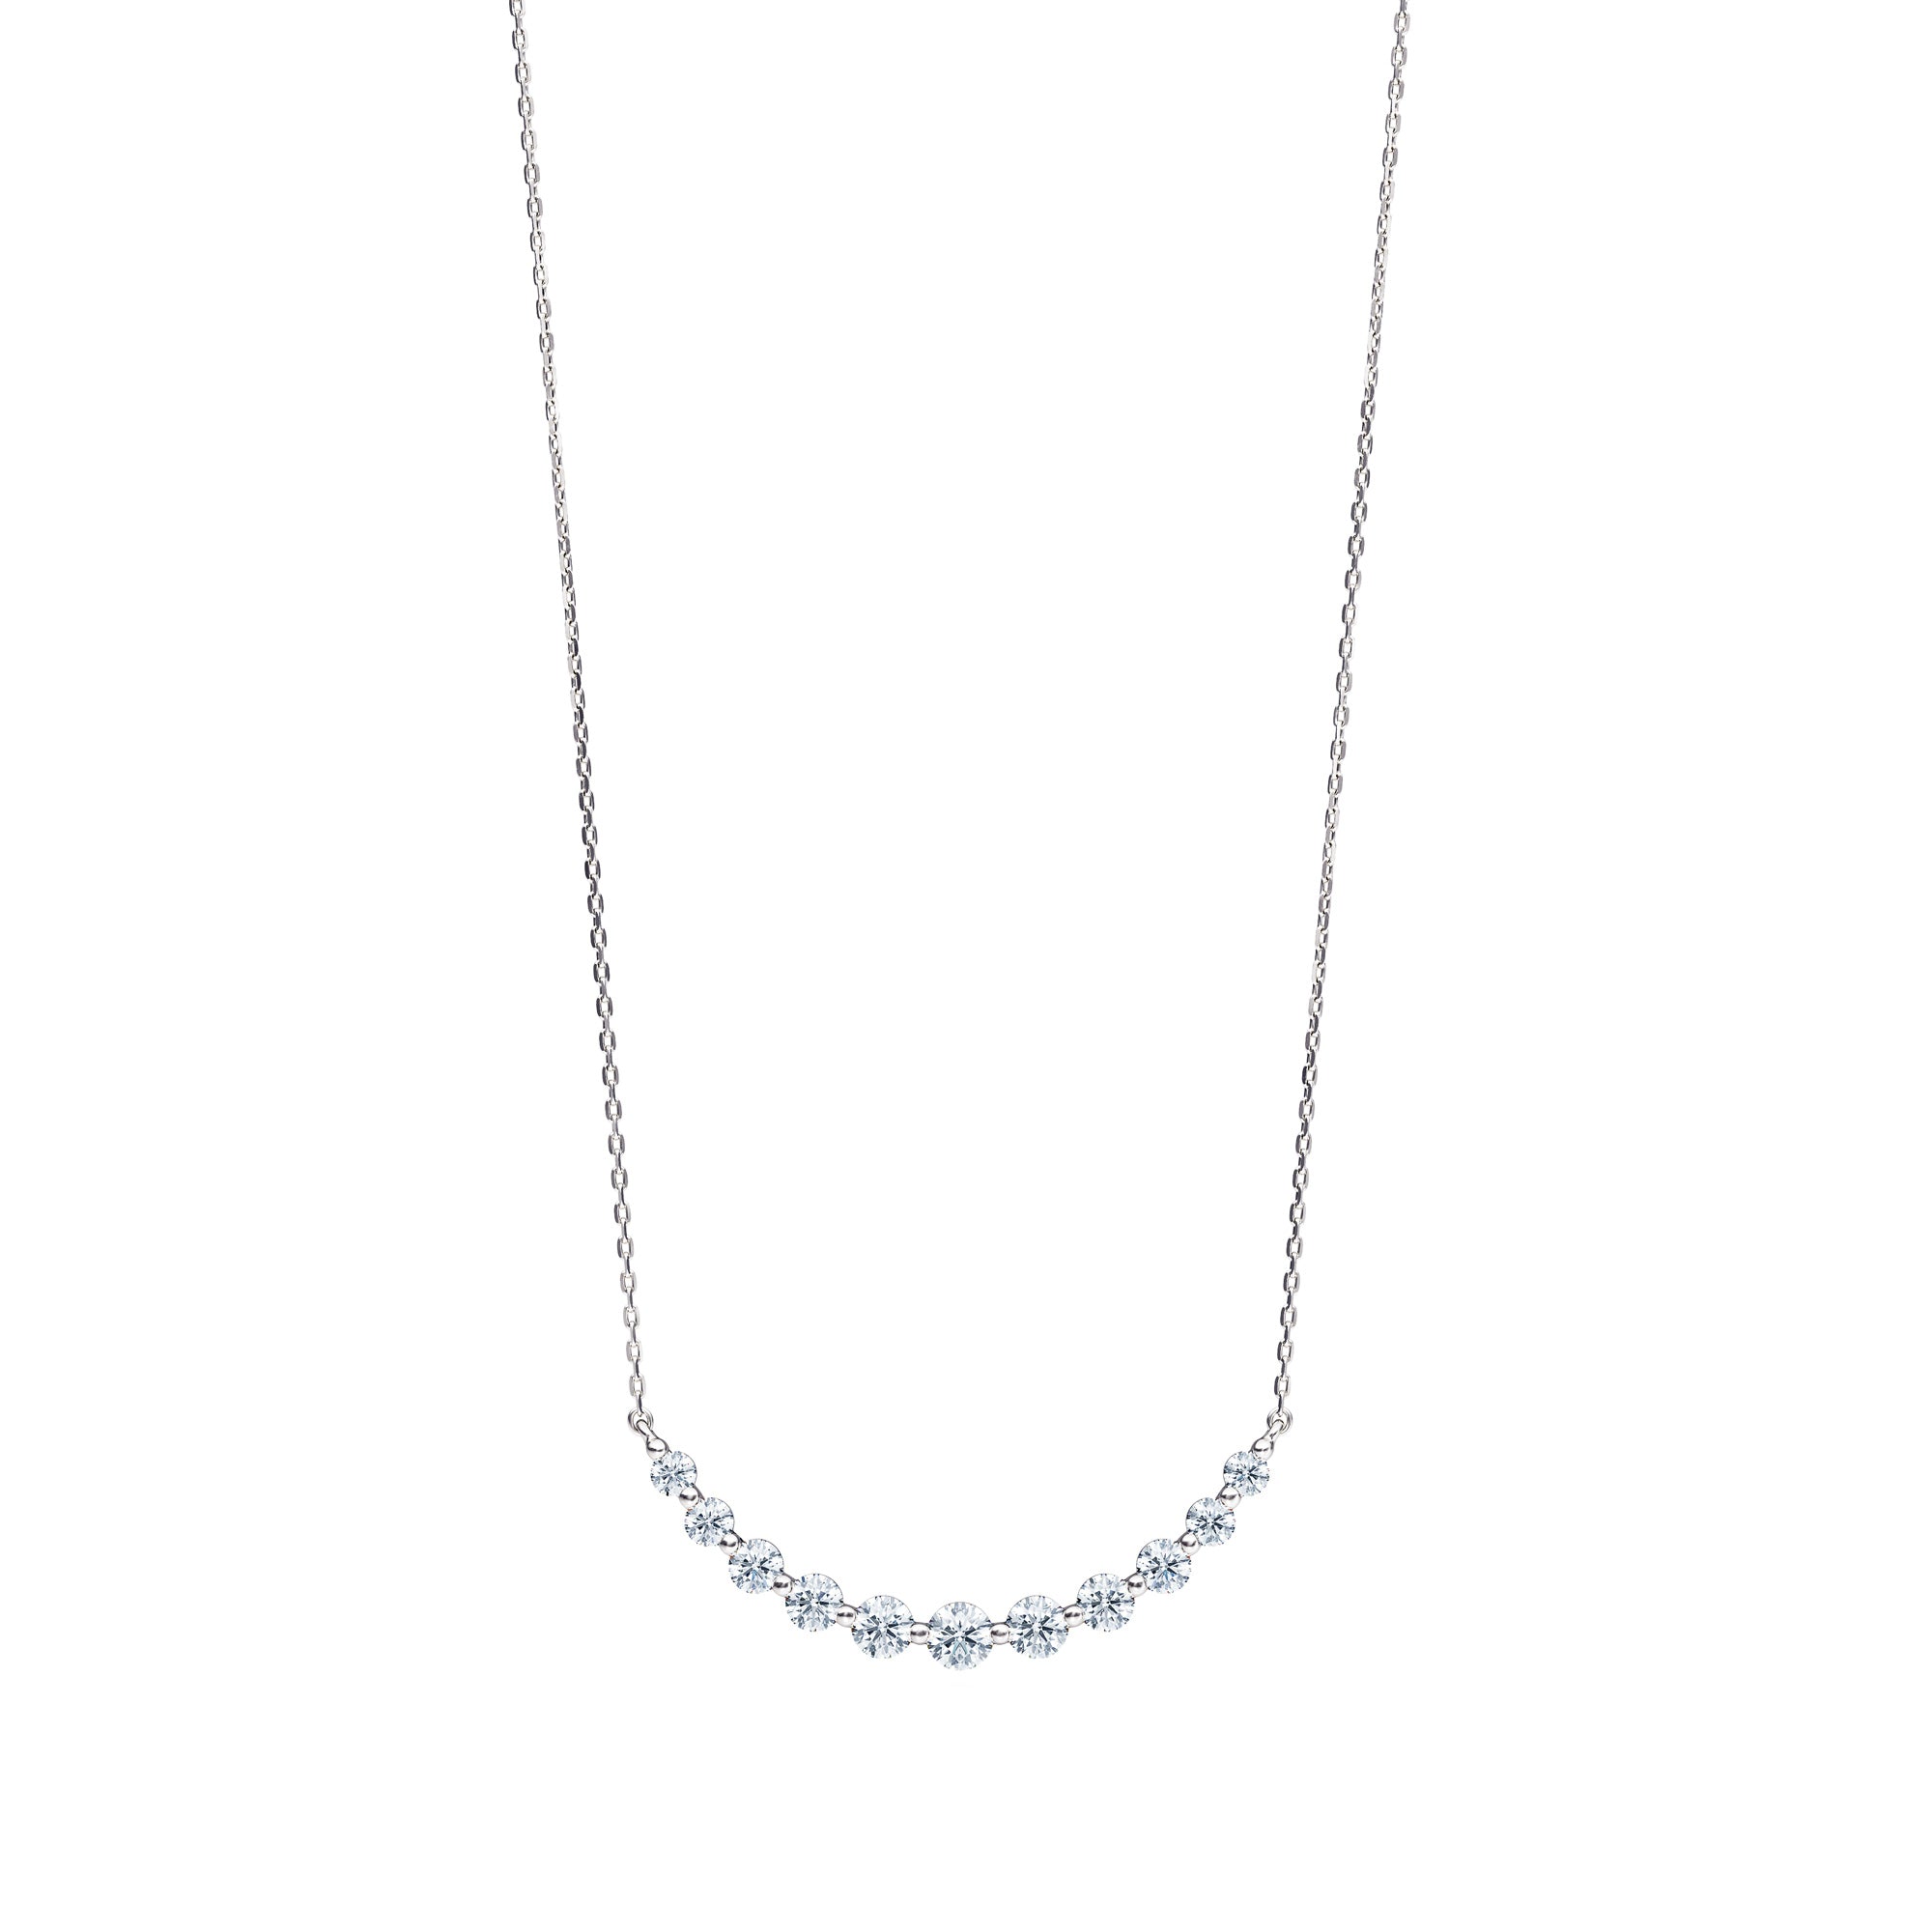 Graduated Diamond Smile Necklace in 14k White Gold (1.5ct)